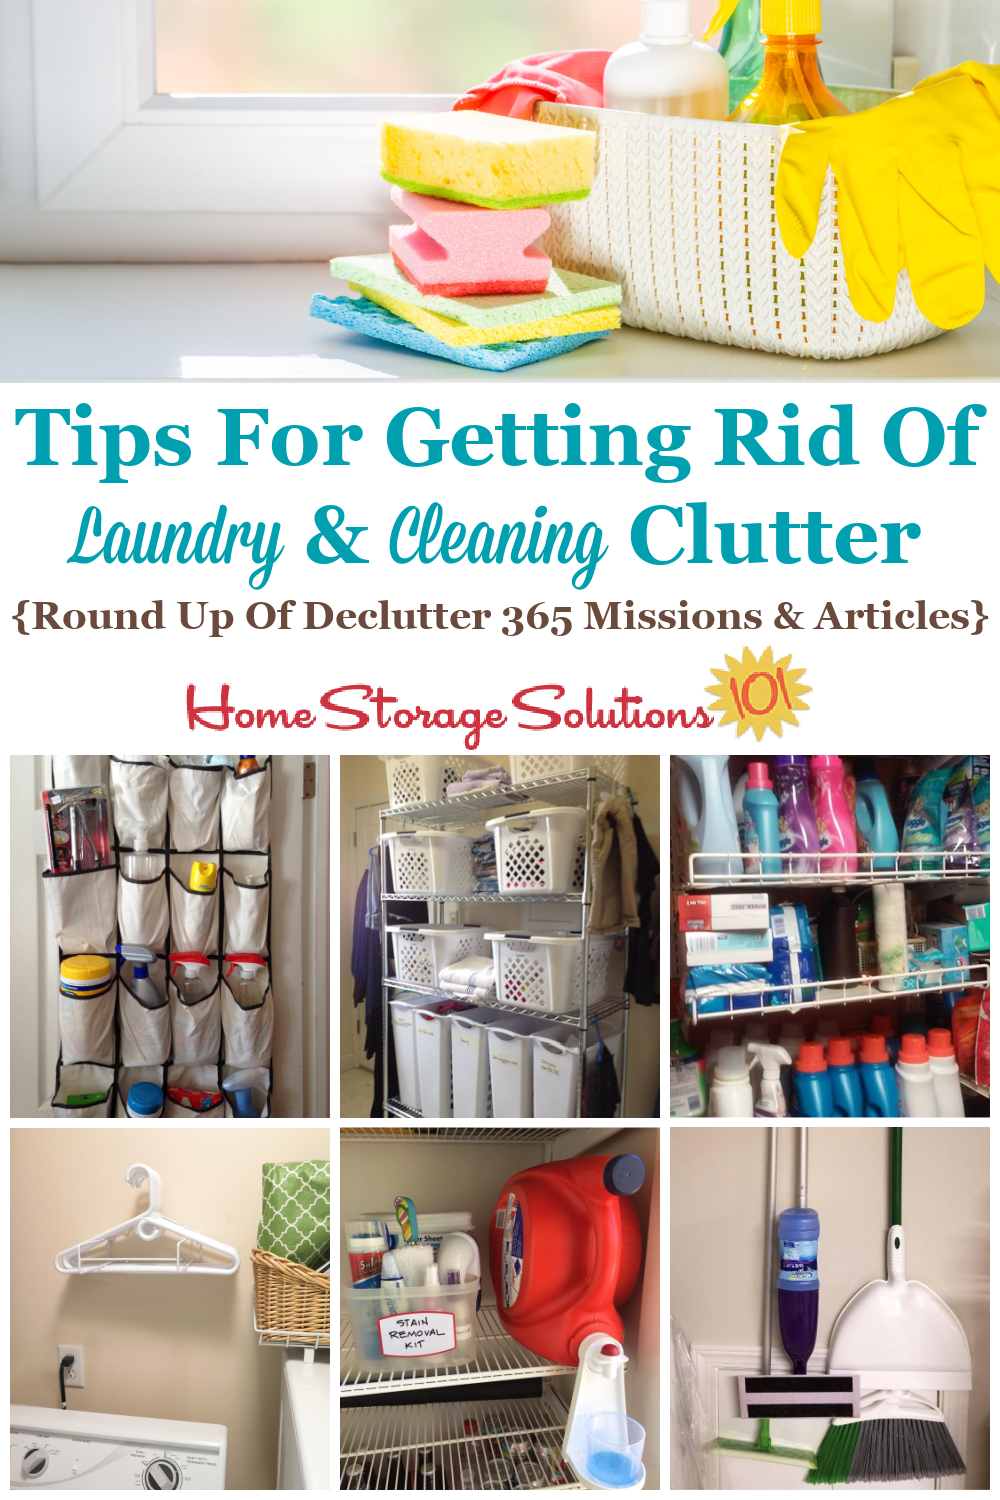 Here is a checklist of ideas for what types of laundry and cleaning clutter to get rid of, plus a round up of Declutter 365 missions and articles to help you accomplish these tasks {on Home Storage Solutions 101} #Declutter365 #CleaningClutter #LaundryClutter